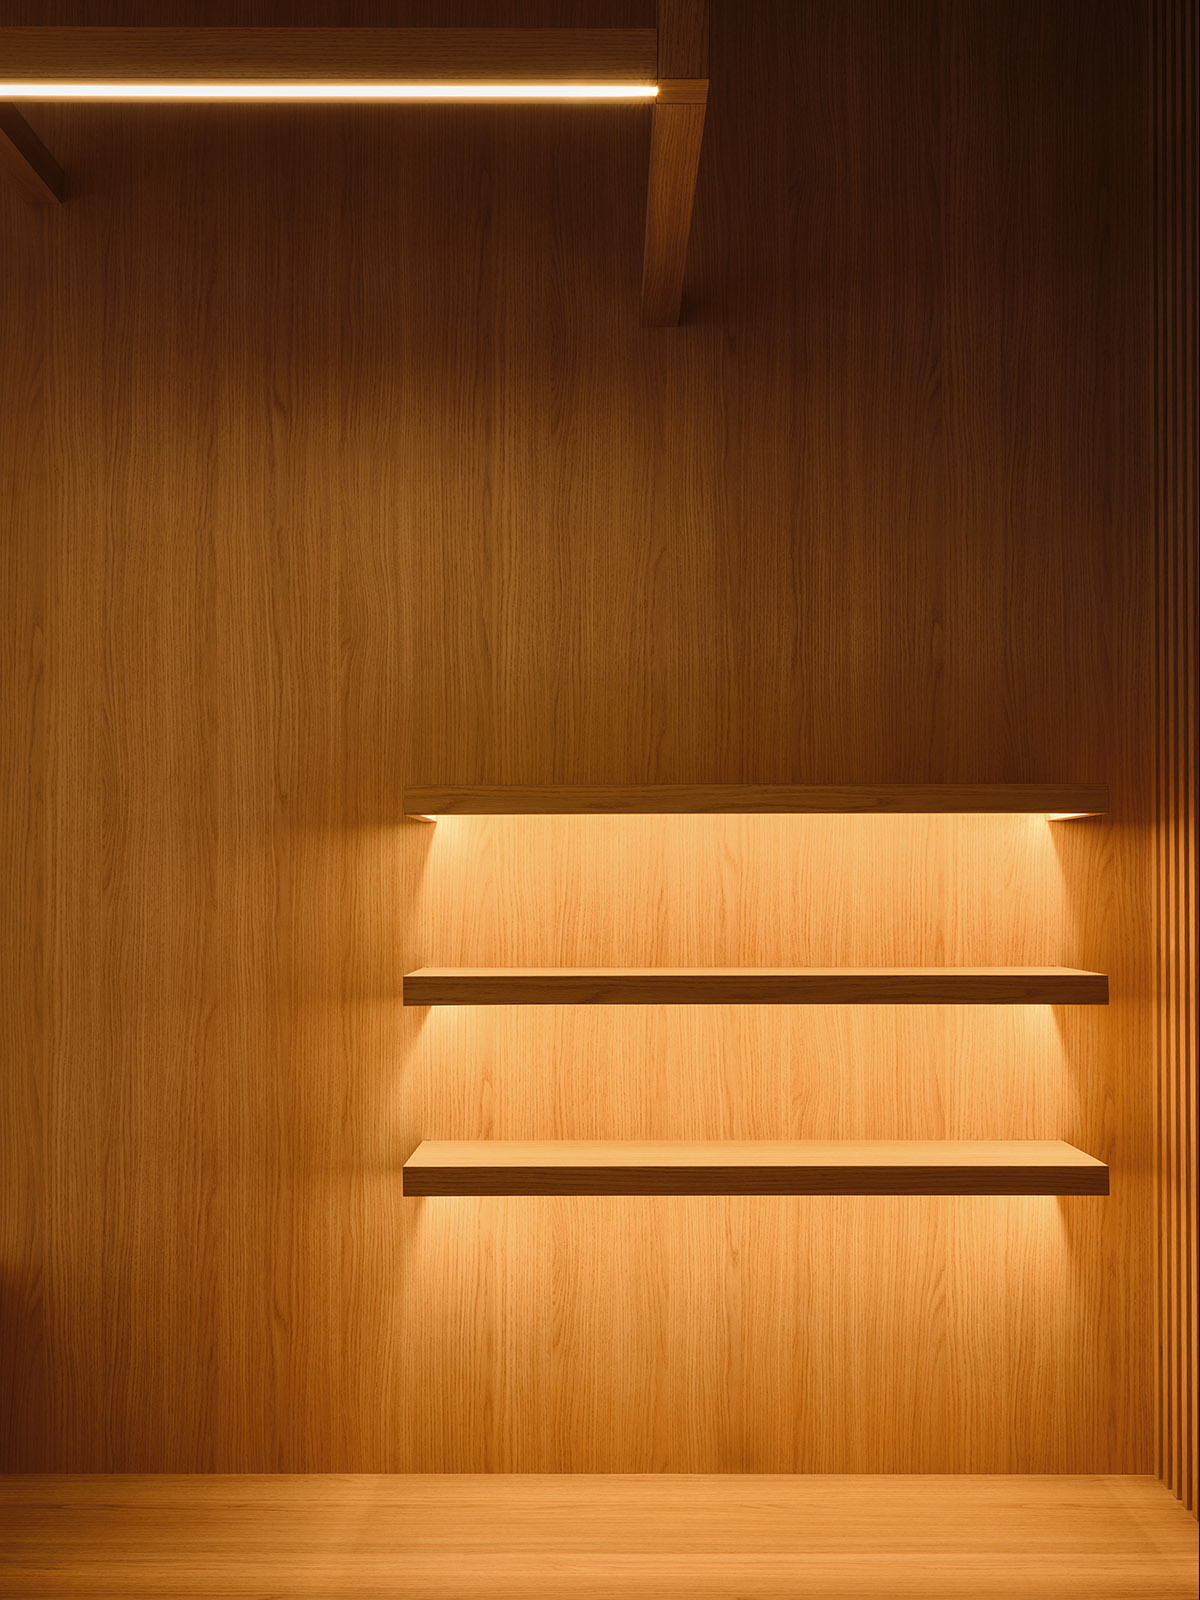 Innovation Eye Clinic by Atelier Sun features artistic ceiling made of wooden slats in Ontario